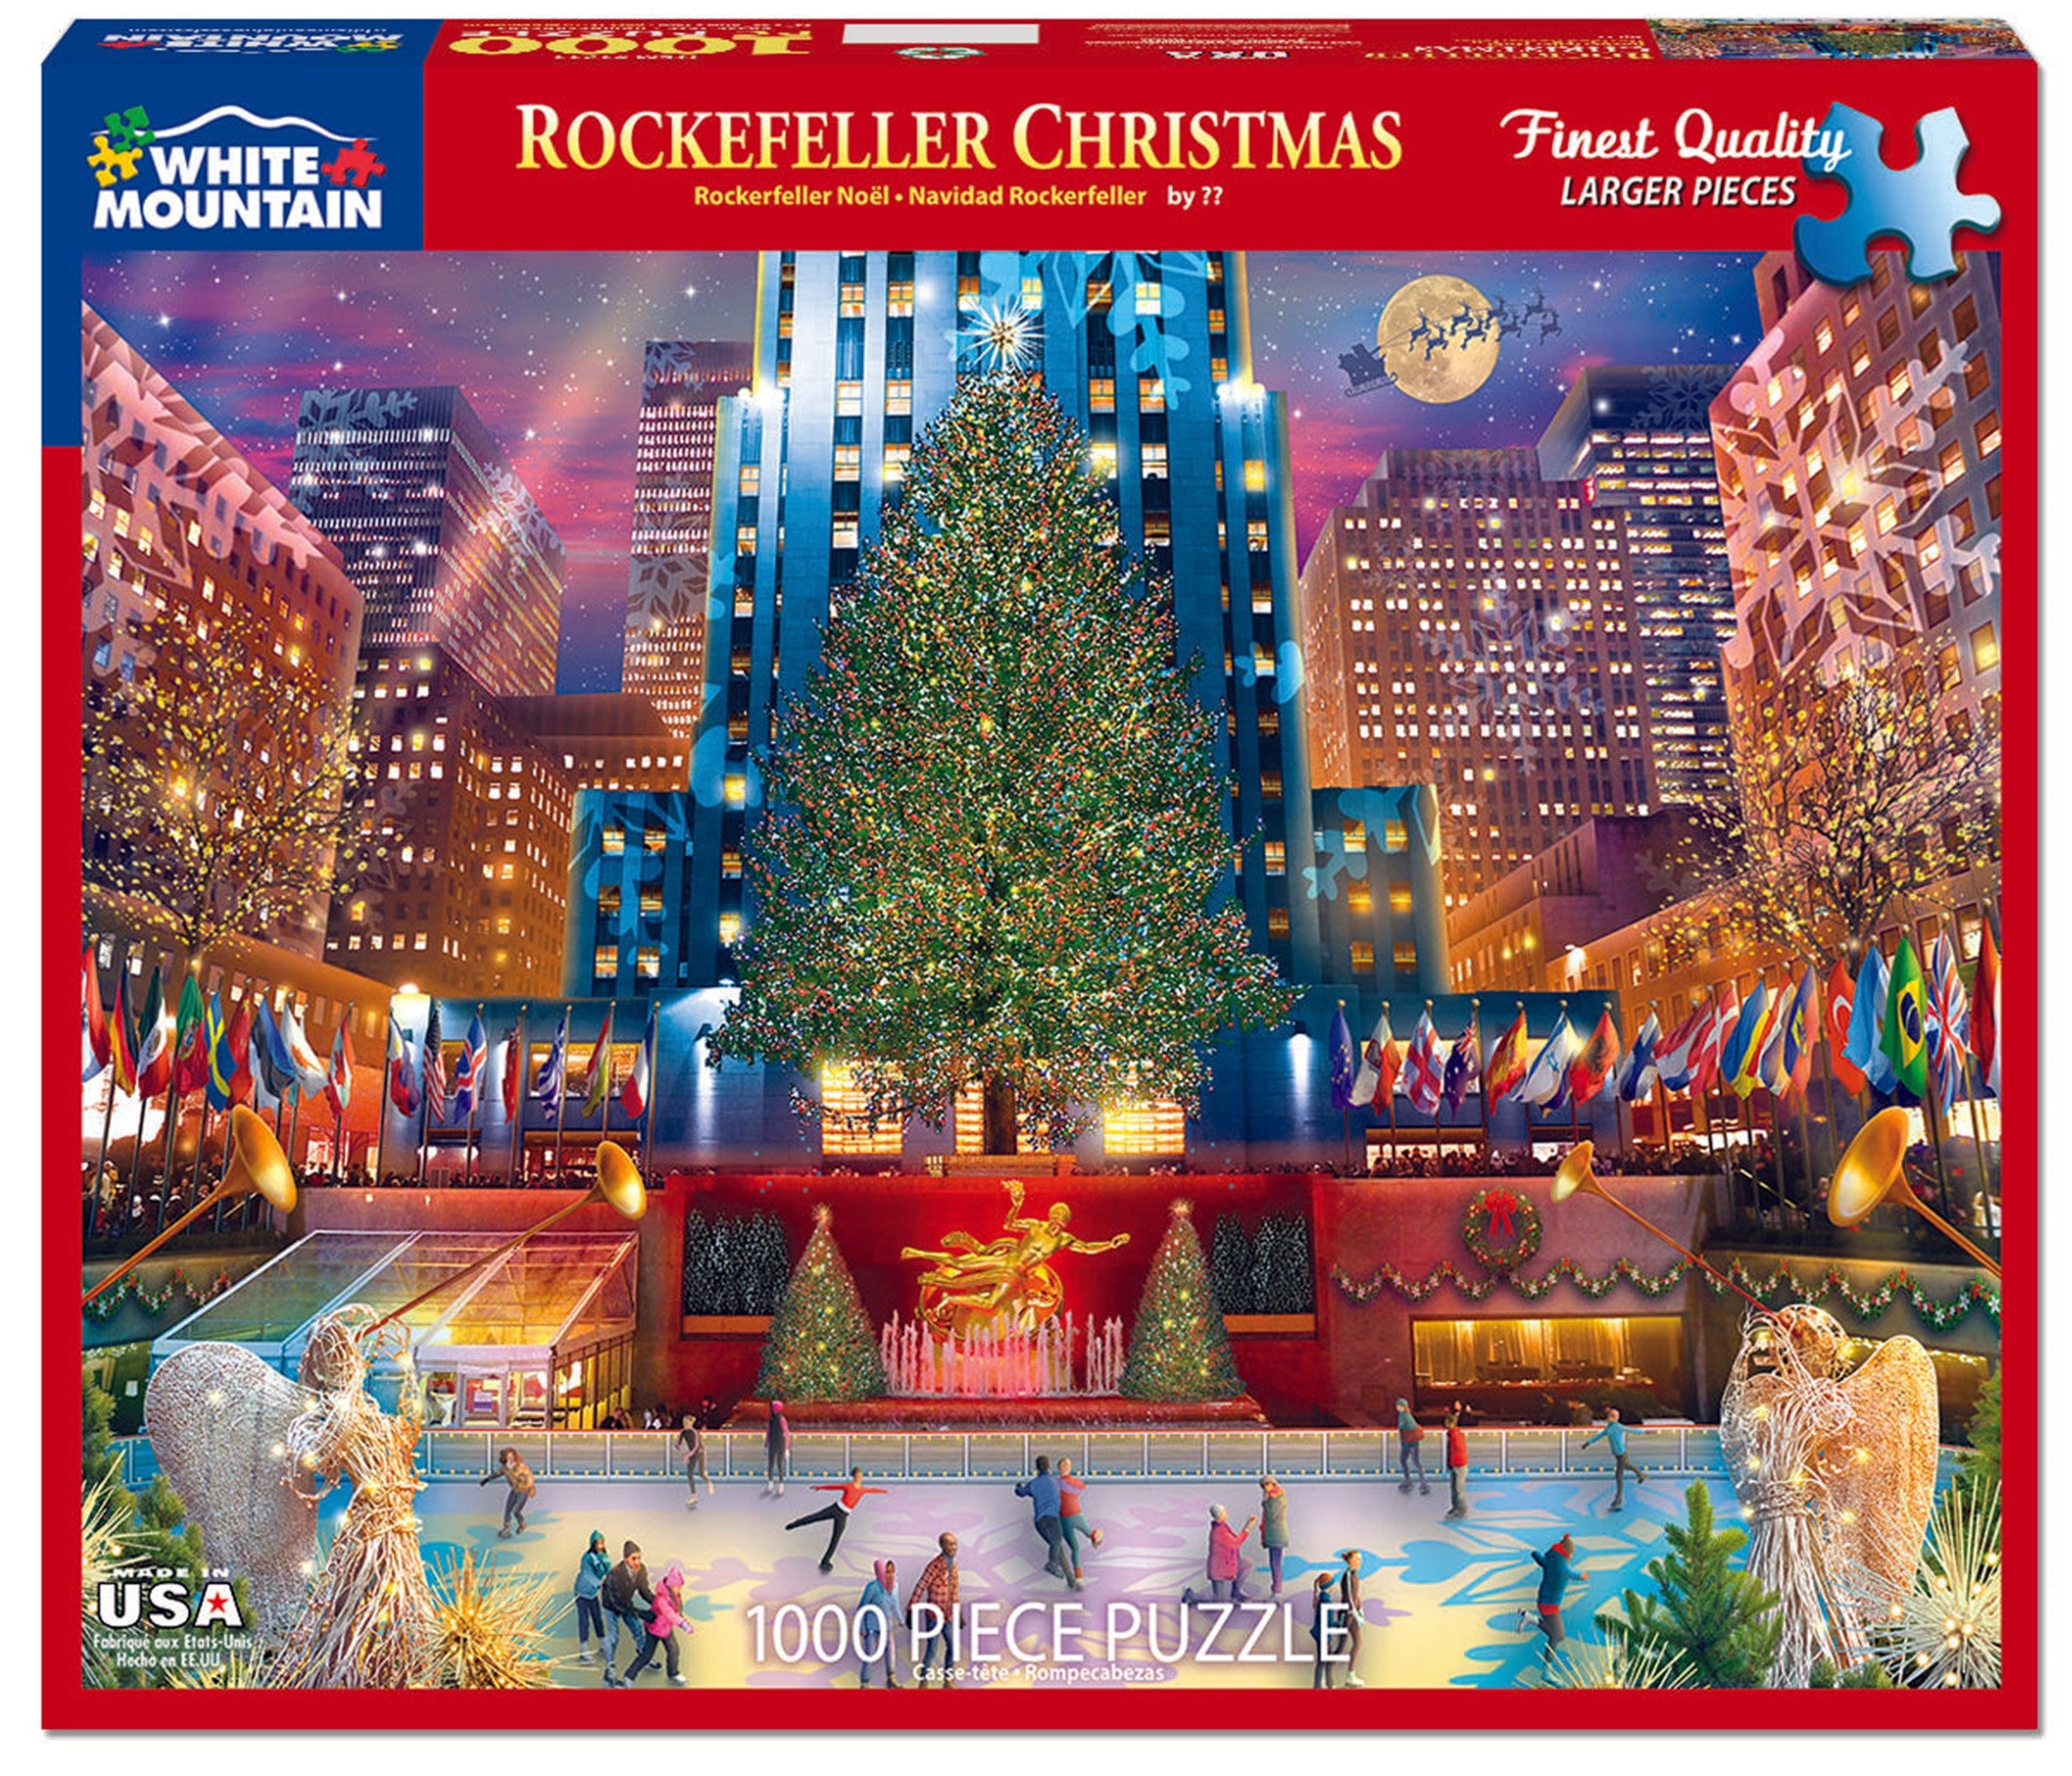 ⭐HOLIDAY⭐ Rockefeller Christmas Jigsaw Puzzle - 1000 Piece